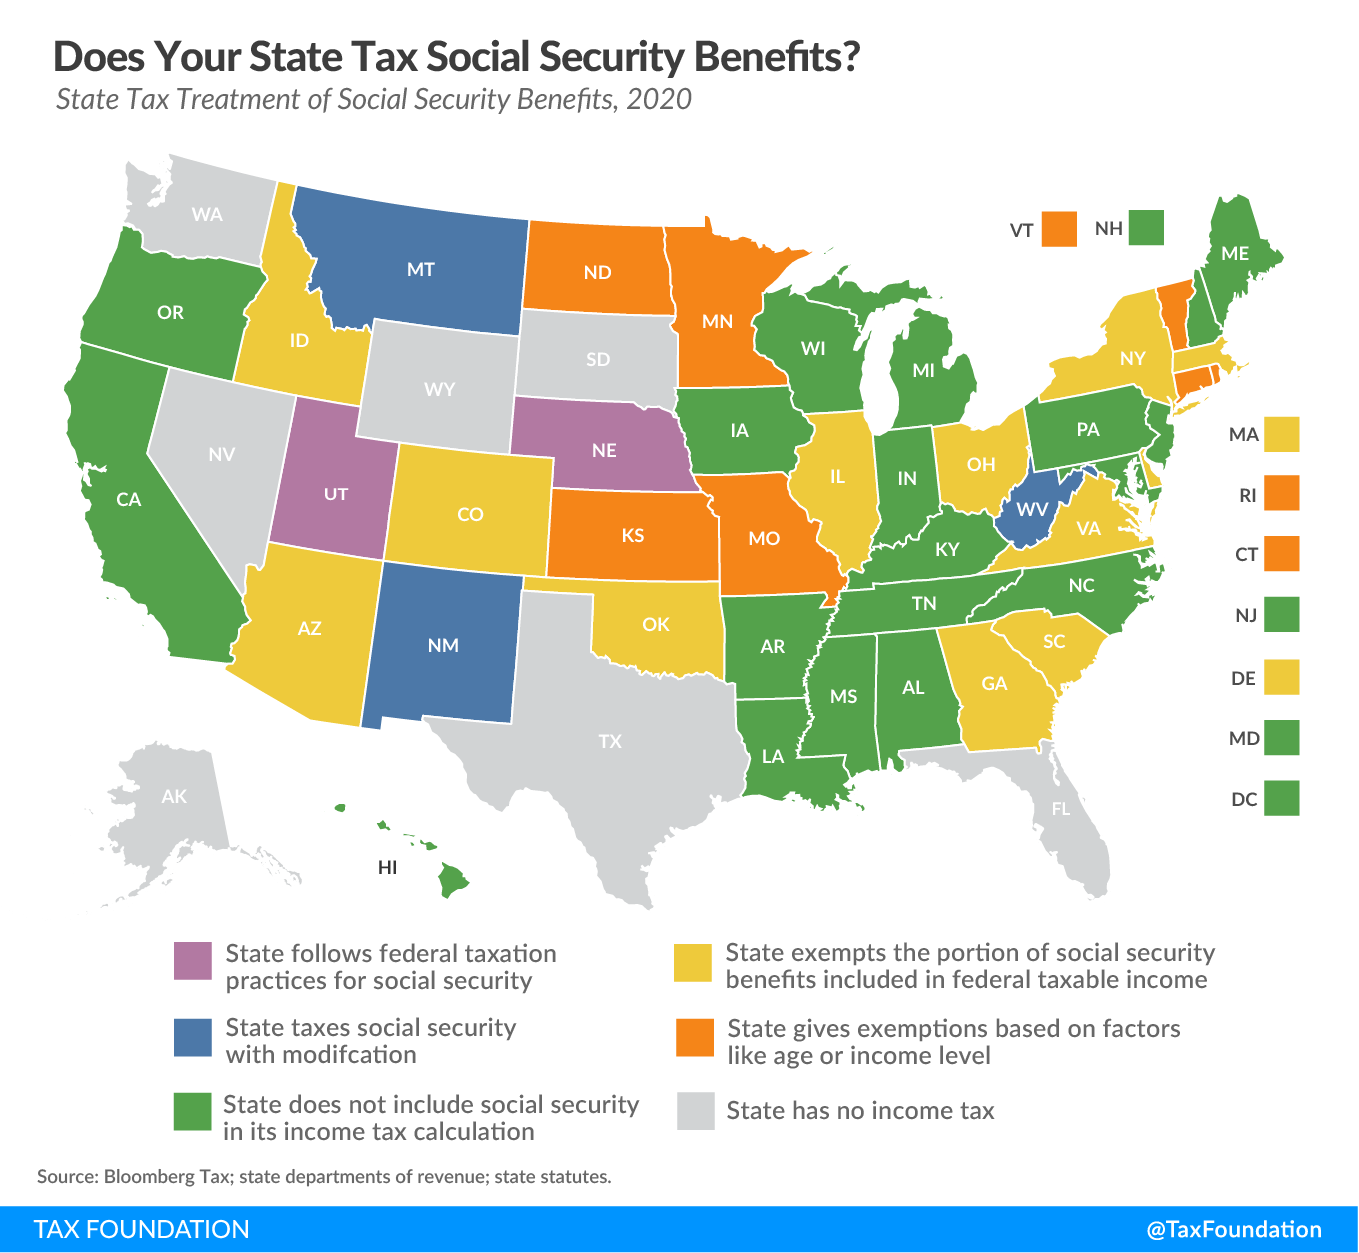 Does Your State Tax Social Security Benefits? States that tax social security benefits